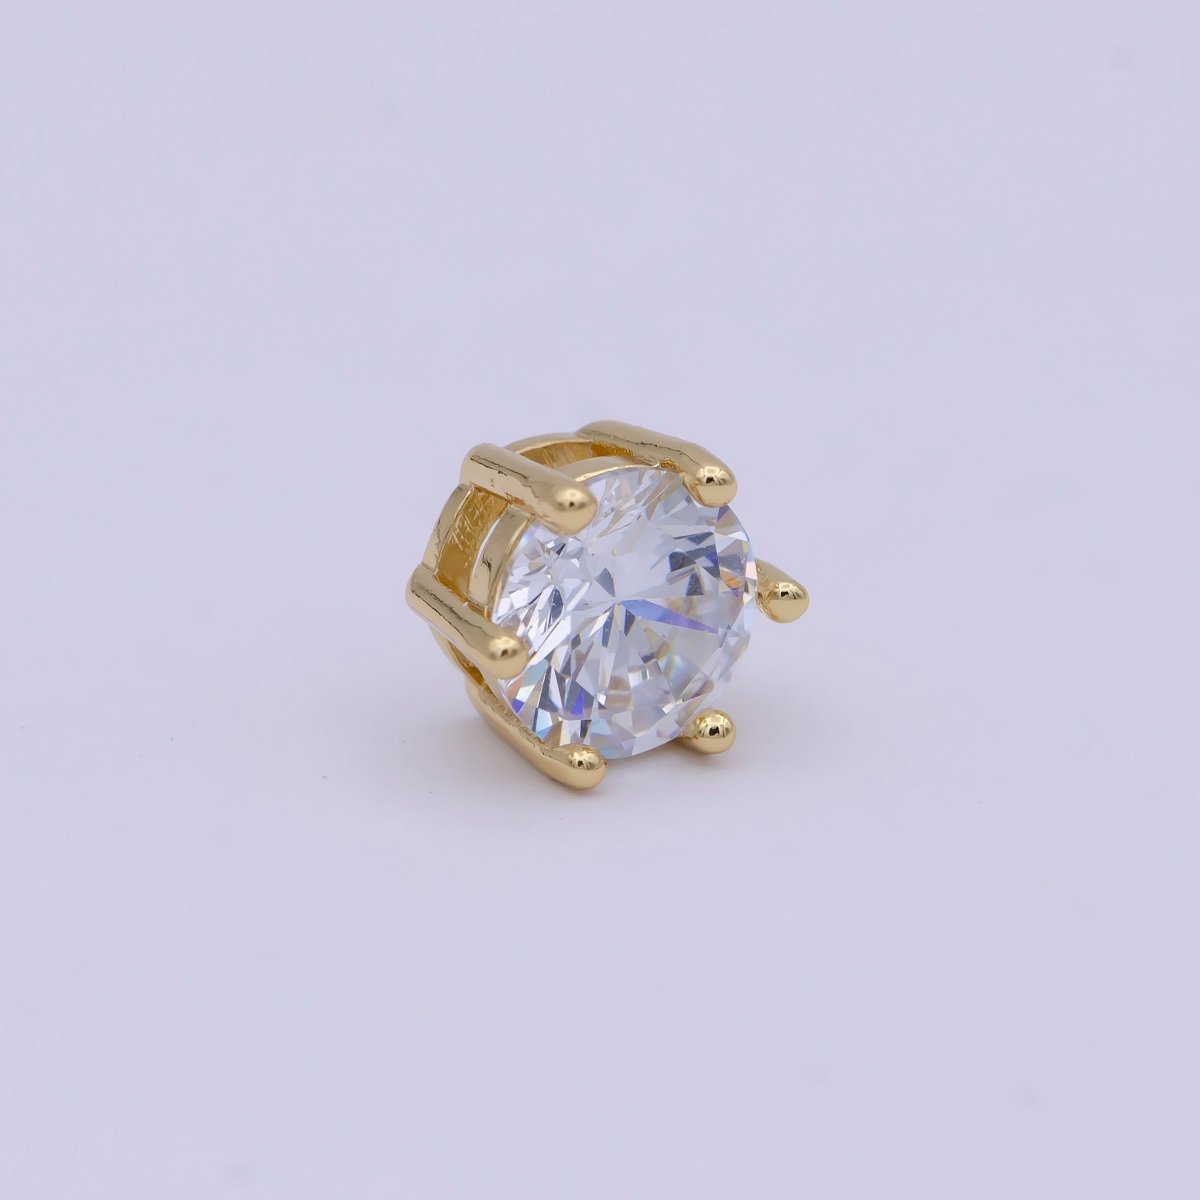 Gold Filled Solitaire CZ Round Connector Charm Beads for Bracelet Component B-465 - DLUXCA